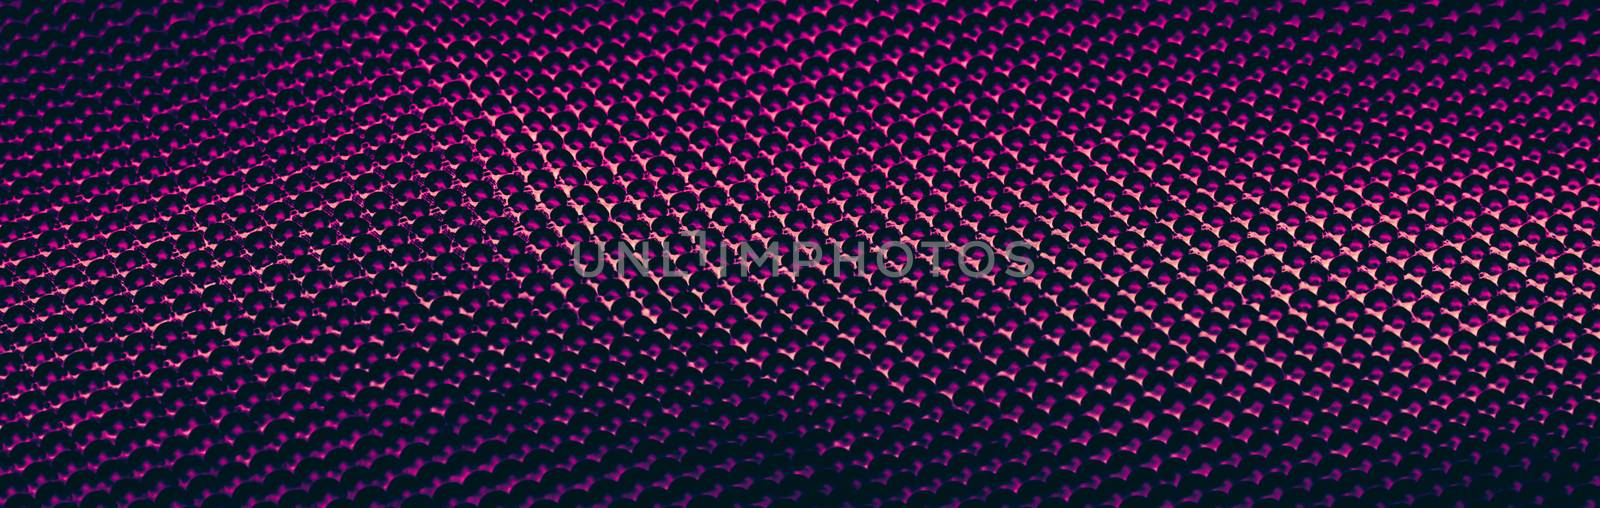 Pink metallic abstract background, futuristic surface and high t by Anneleven